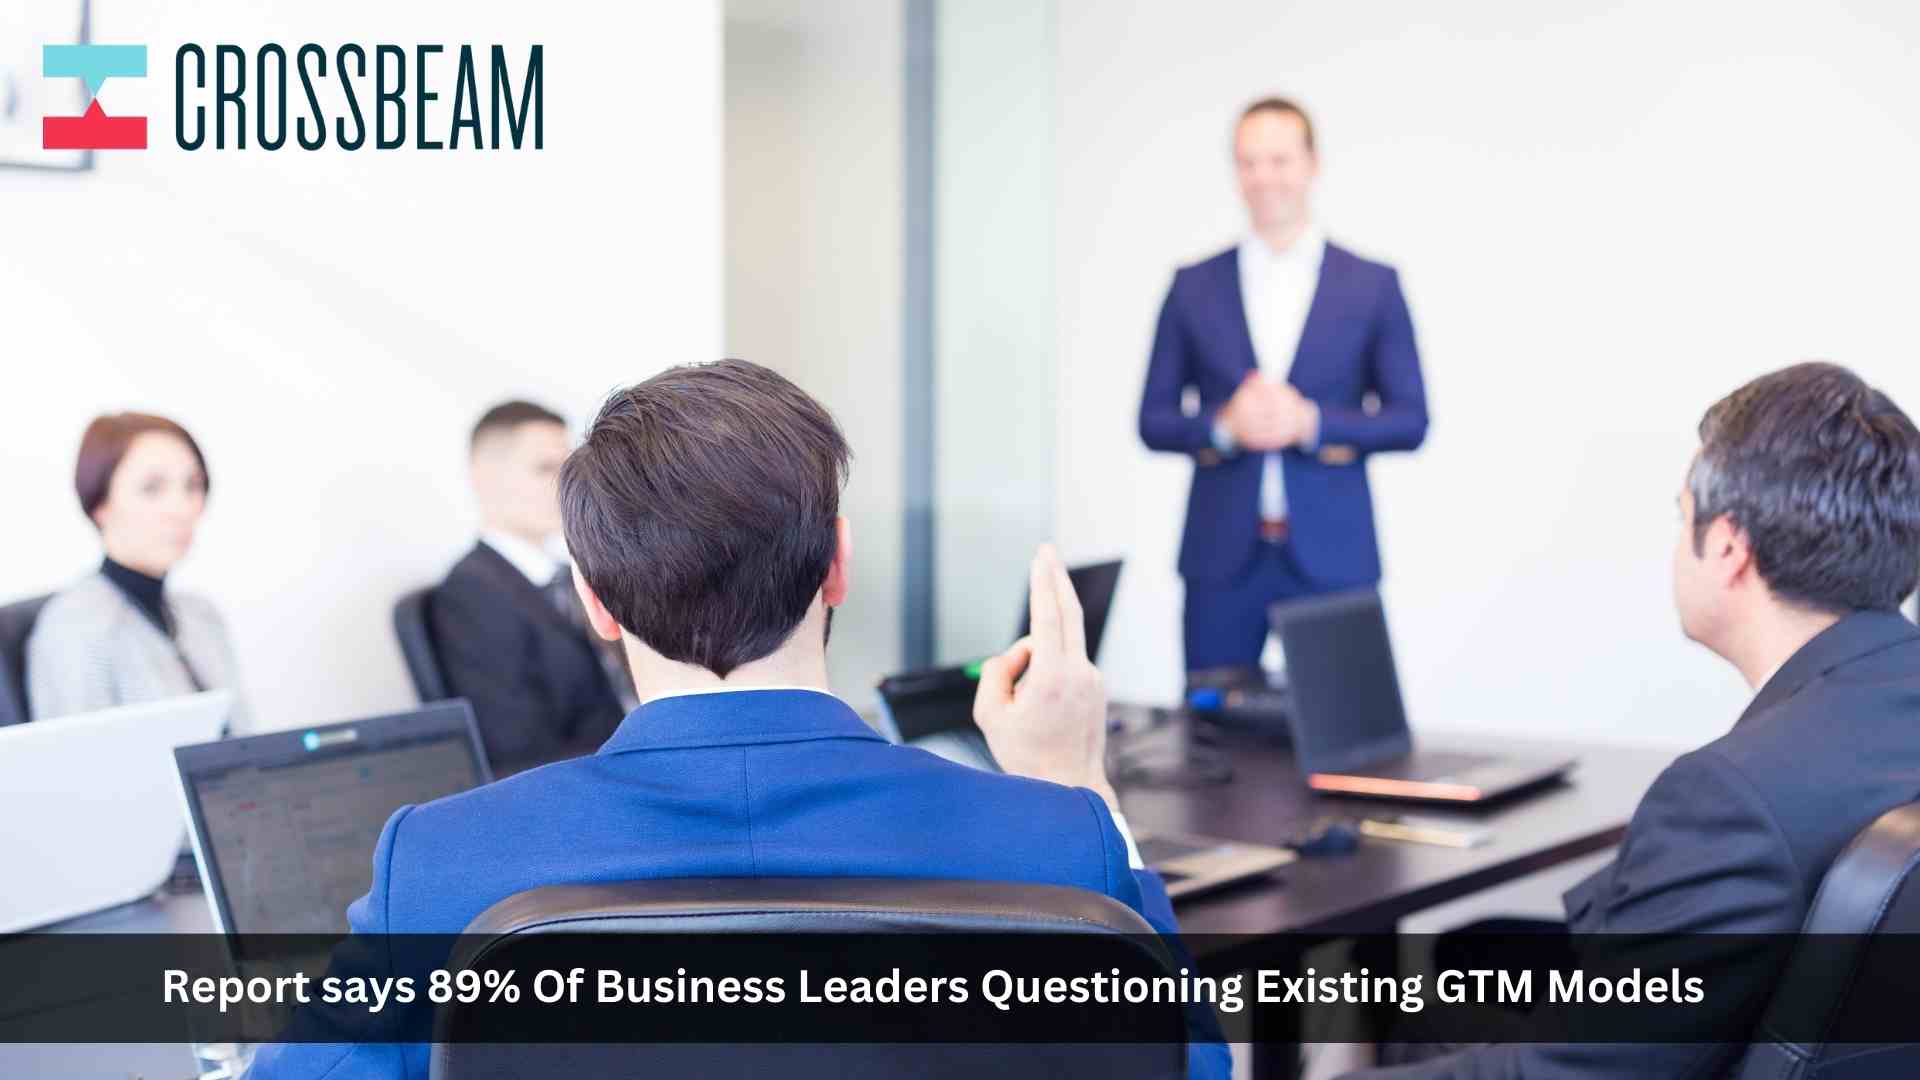 New Report: 89% of Business Leaders Questioning Existing GTM Models, Looking to Change Strategies